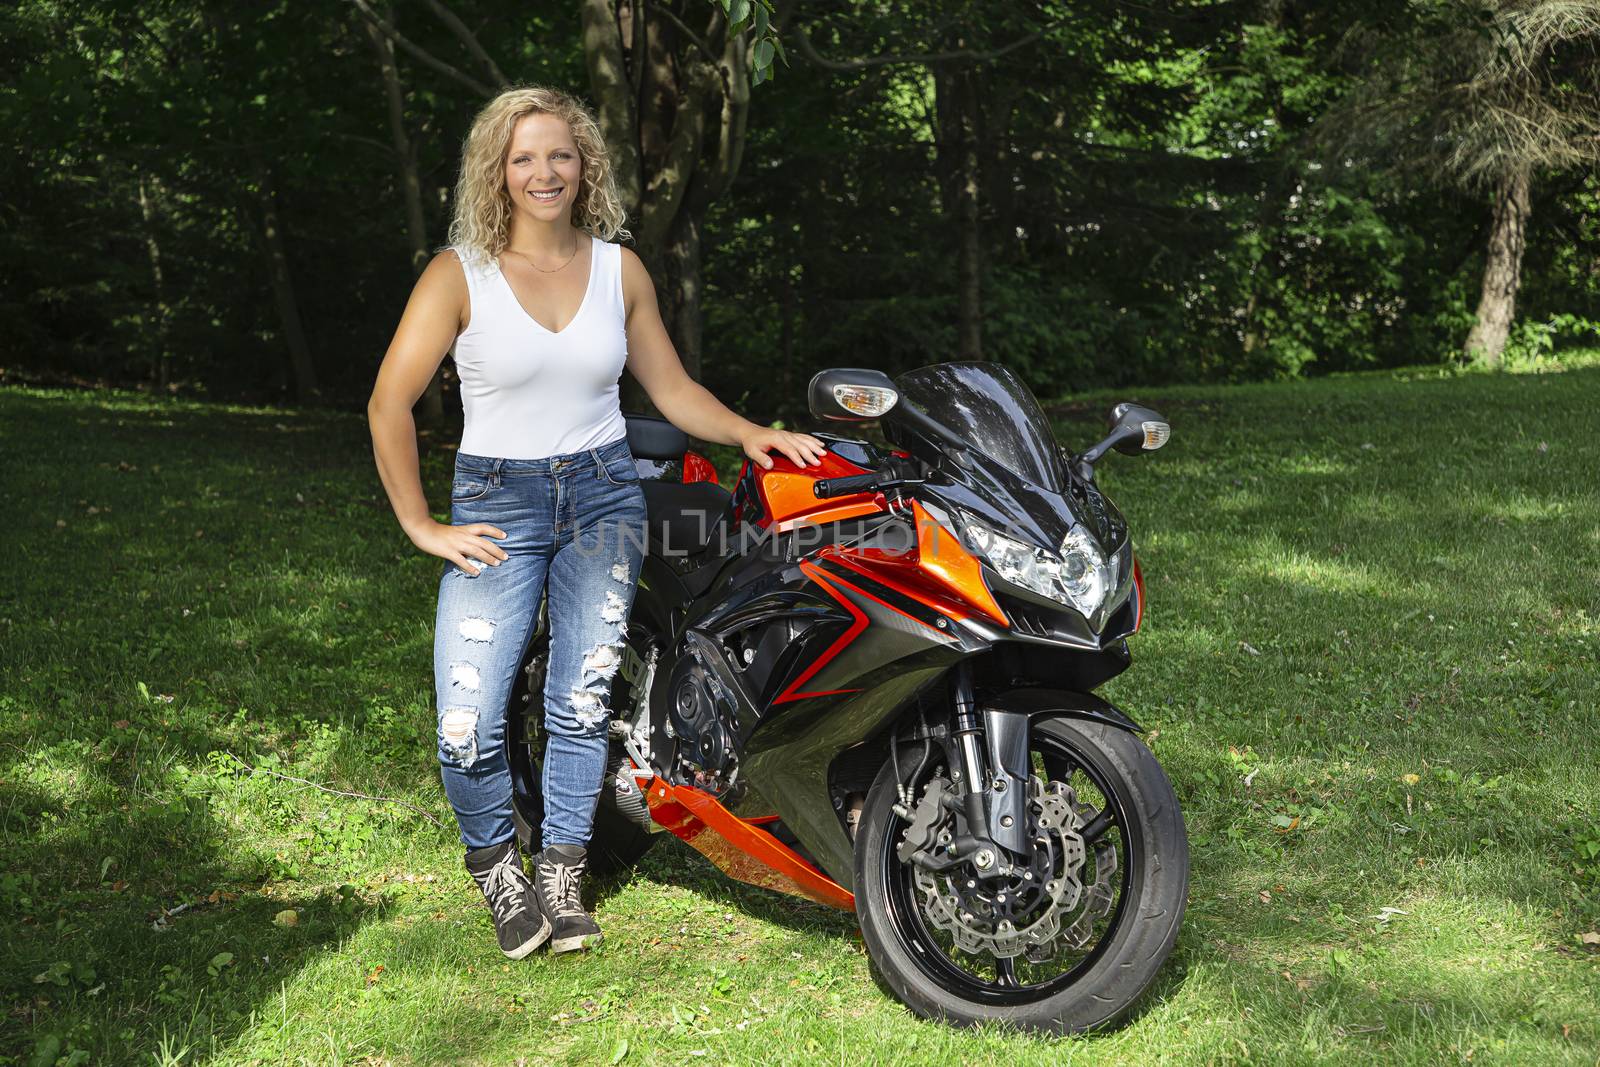 twenty something blond woman, standing beside her sport motocycle, in a park